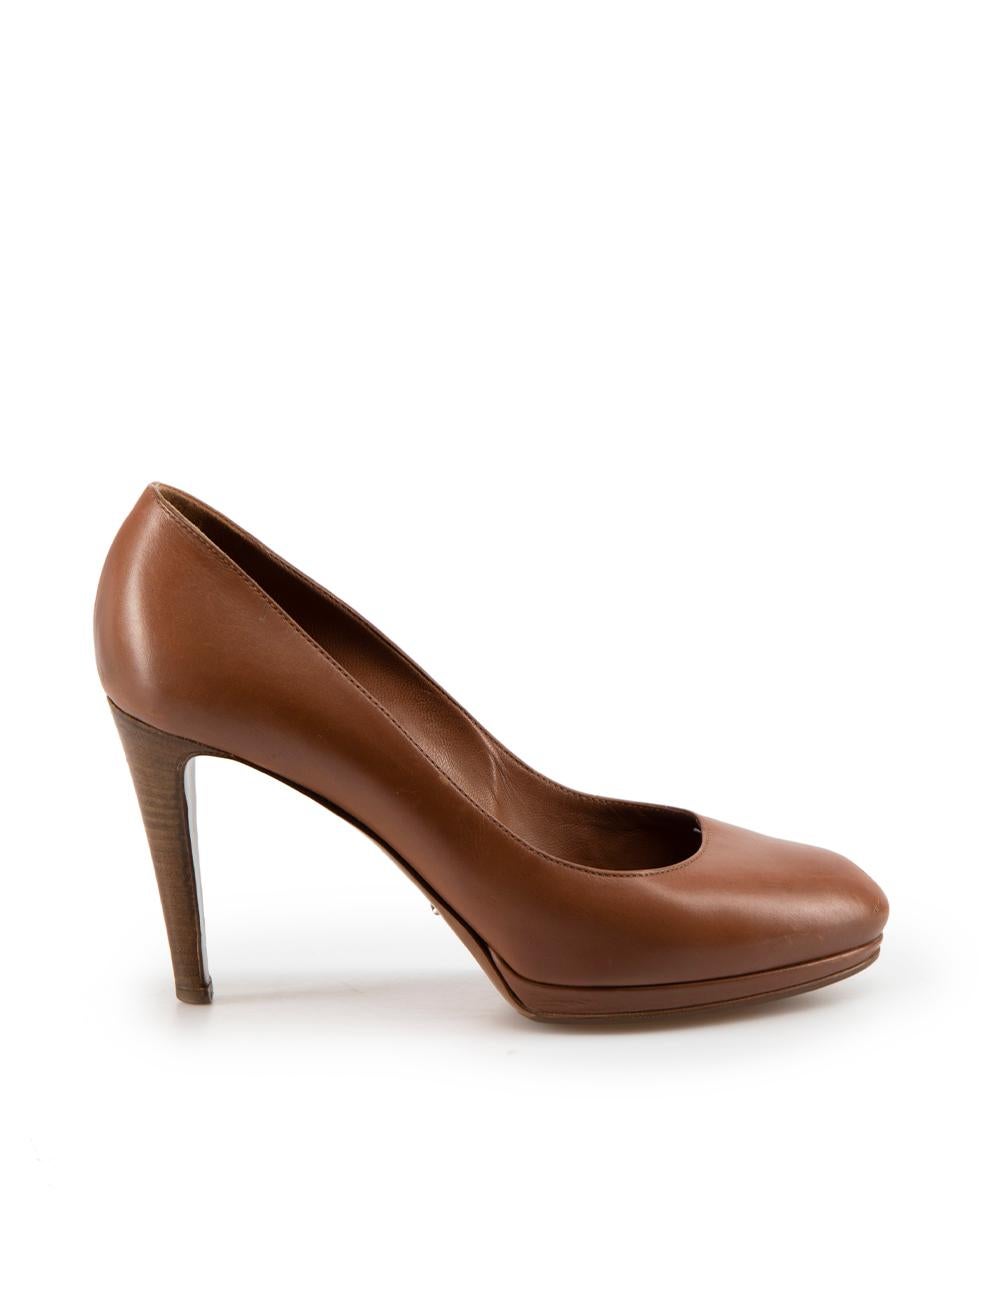 Sergio Rossi Brown Leather Pumps Size IT 38 For Sale